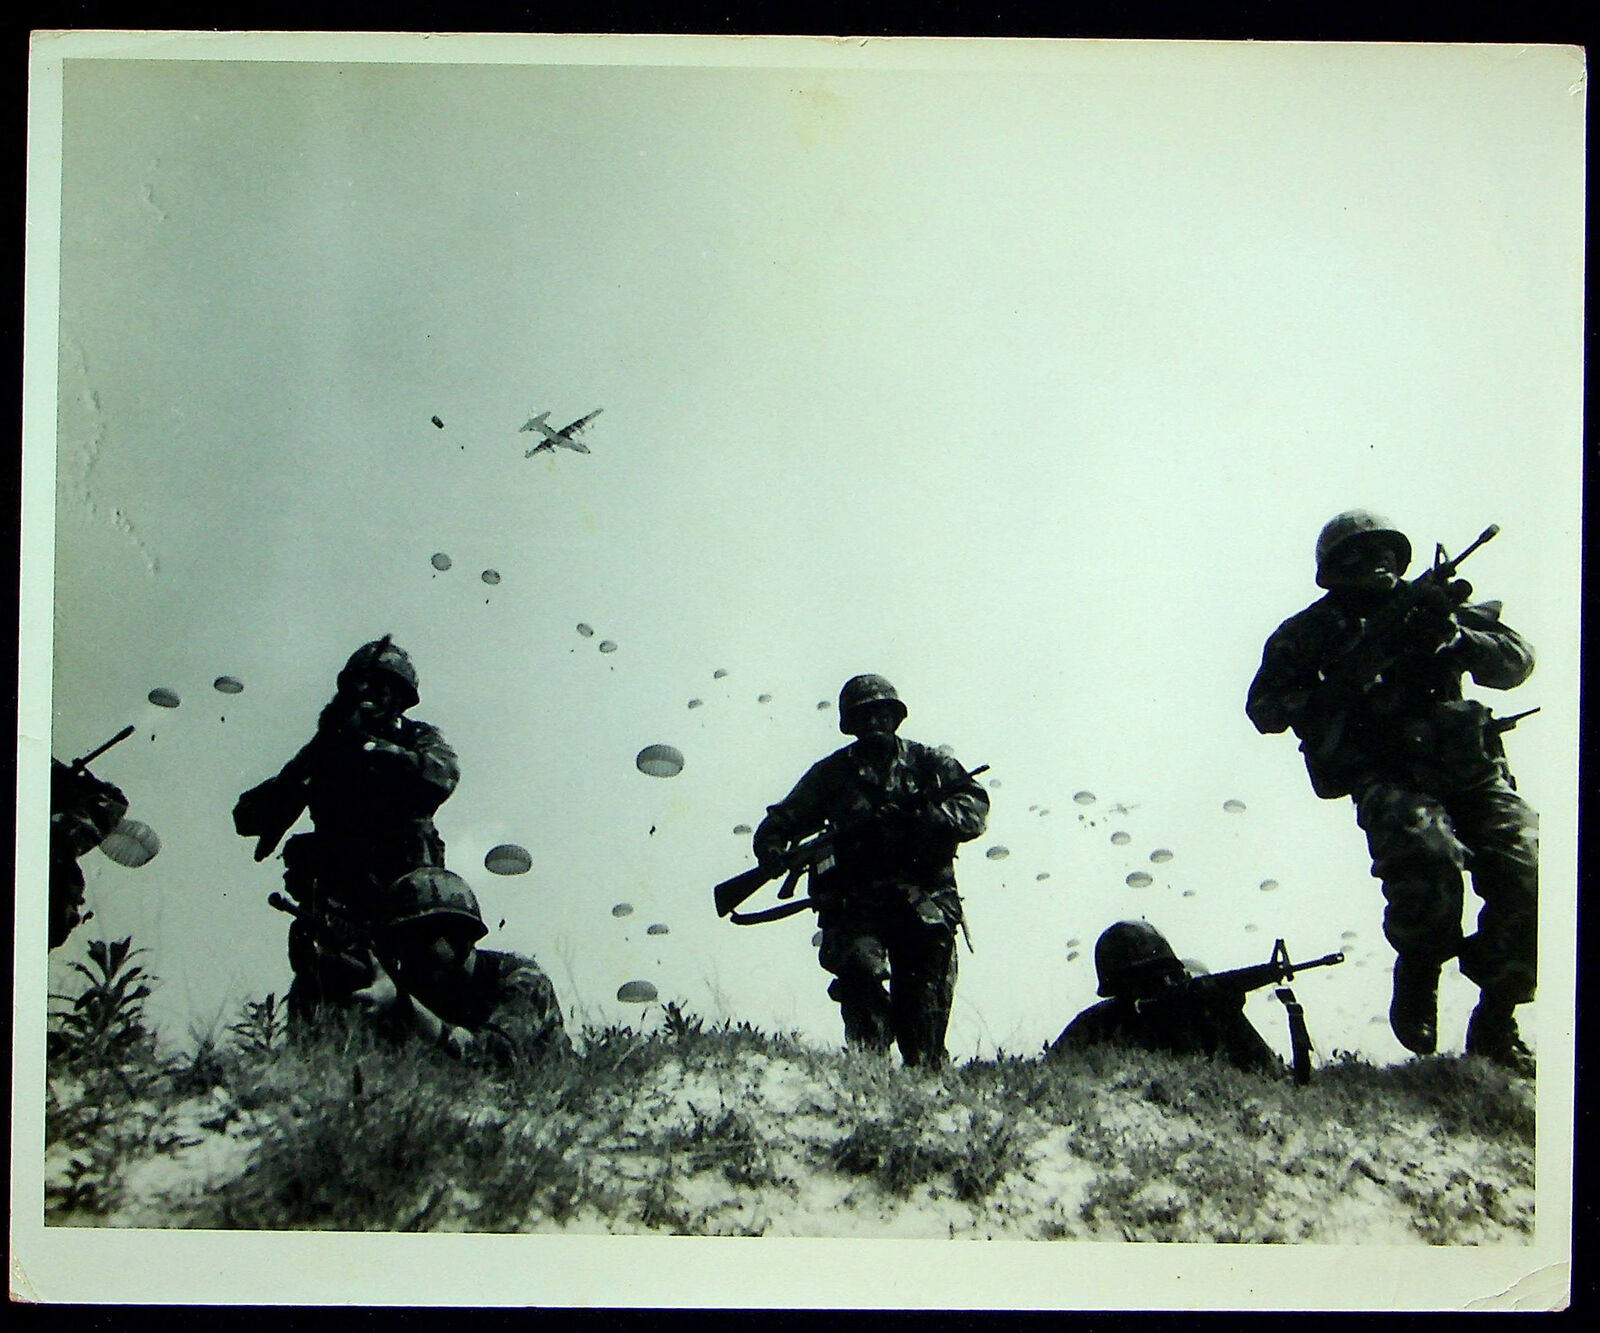 US Army Airborne Assault Exercise Photograph 8x10 1st BN 505th Inf 82nd Abn Div